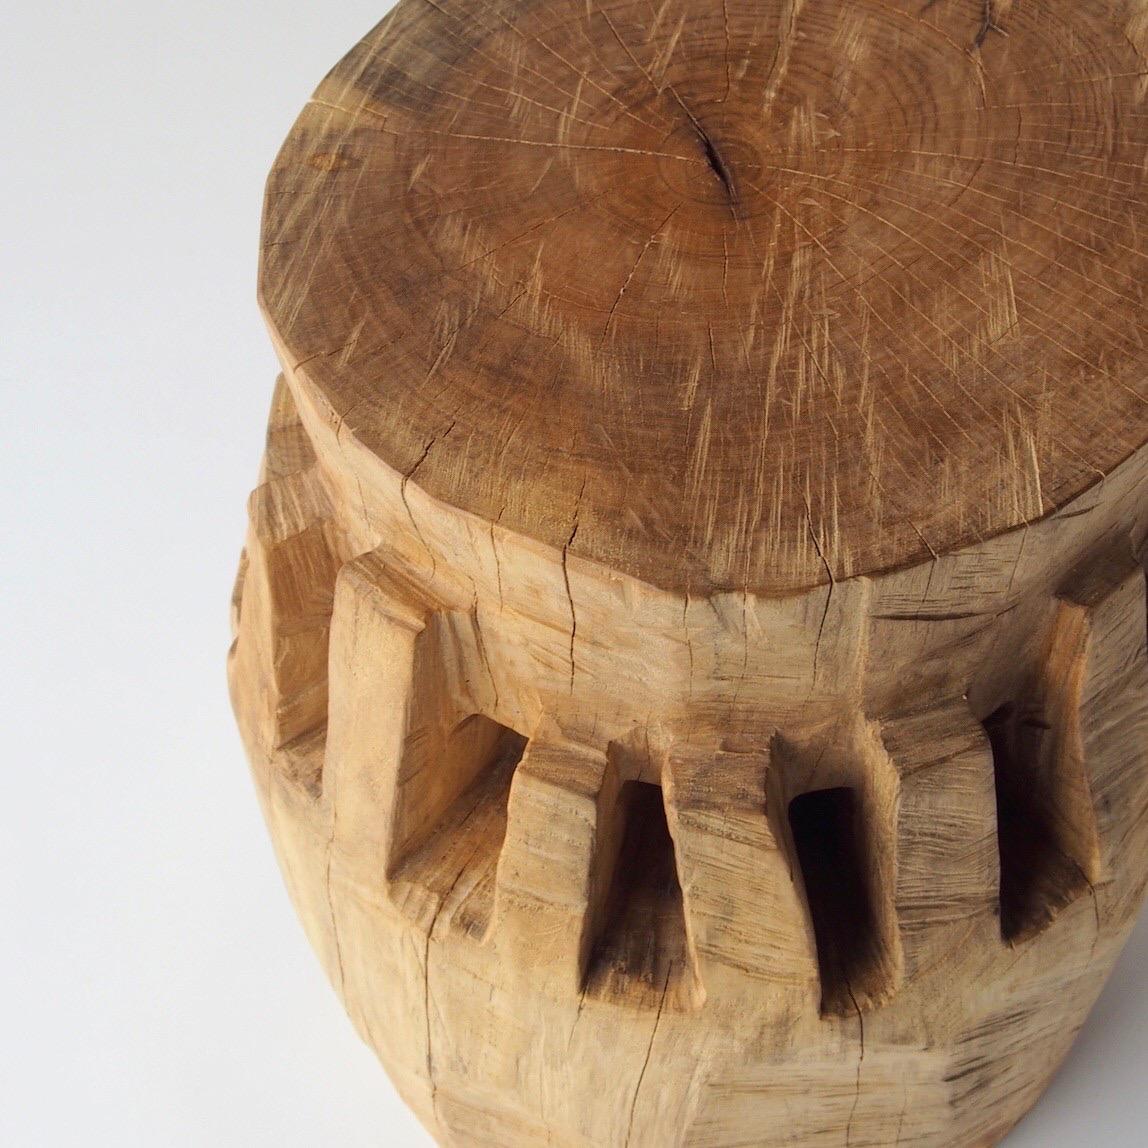 Contemporary Hiroyuki Nishimura Zougei Sculptural Side Table Stool 28 Tribal Glamping For Sale